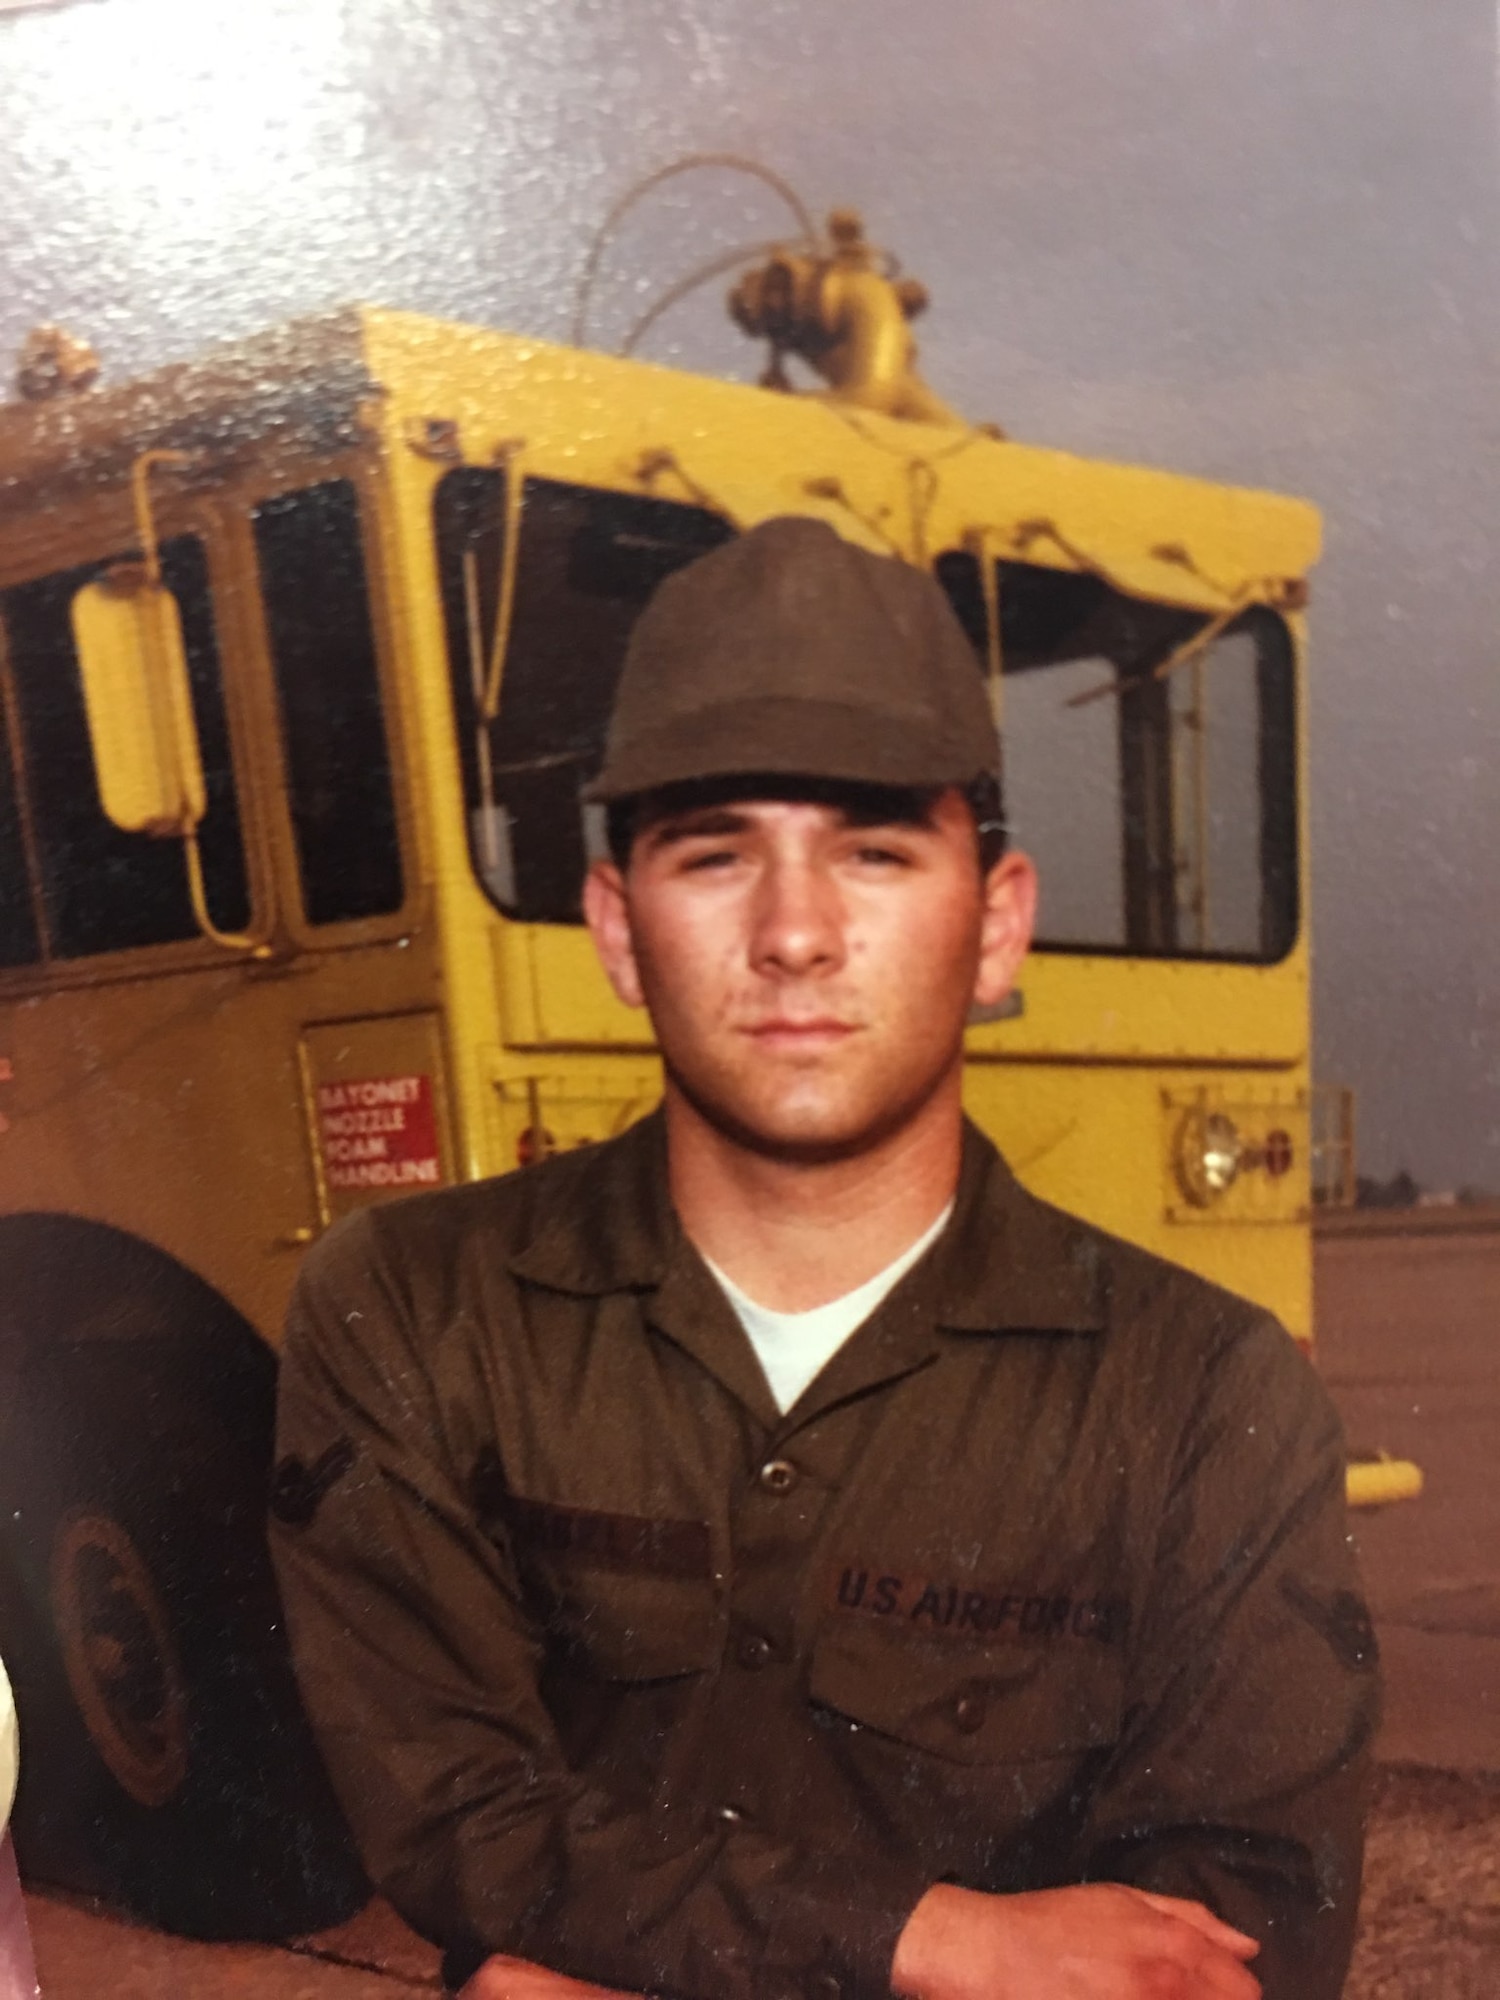 Airman Anthony M. Lebel poses for a photo during his technical training in September of 1983 at Chanute Air Force Base, Ill. Now a chief master sergeant, Lebel is scheduled to retire on August 11, 2018, after more than 35 years of service, at Pease Air National Guard Base, N.H. (Photo courtesy of Chief Master Sgt. Anthony Lebel)